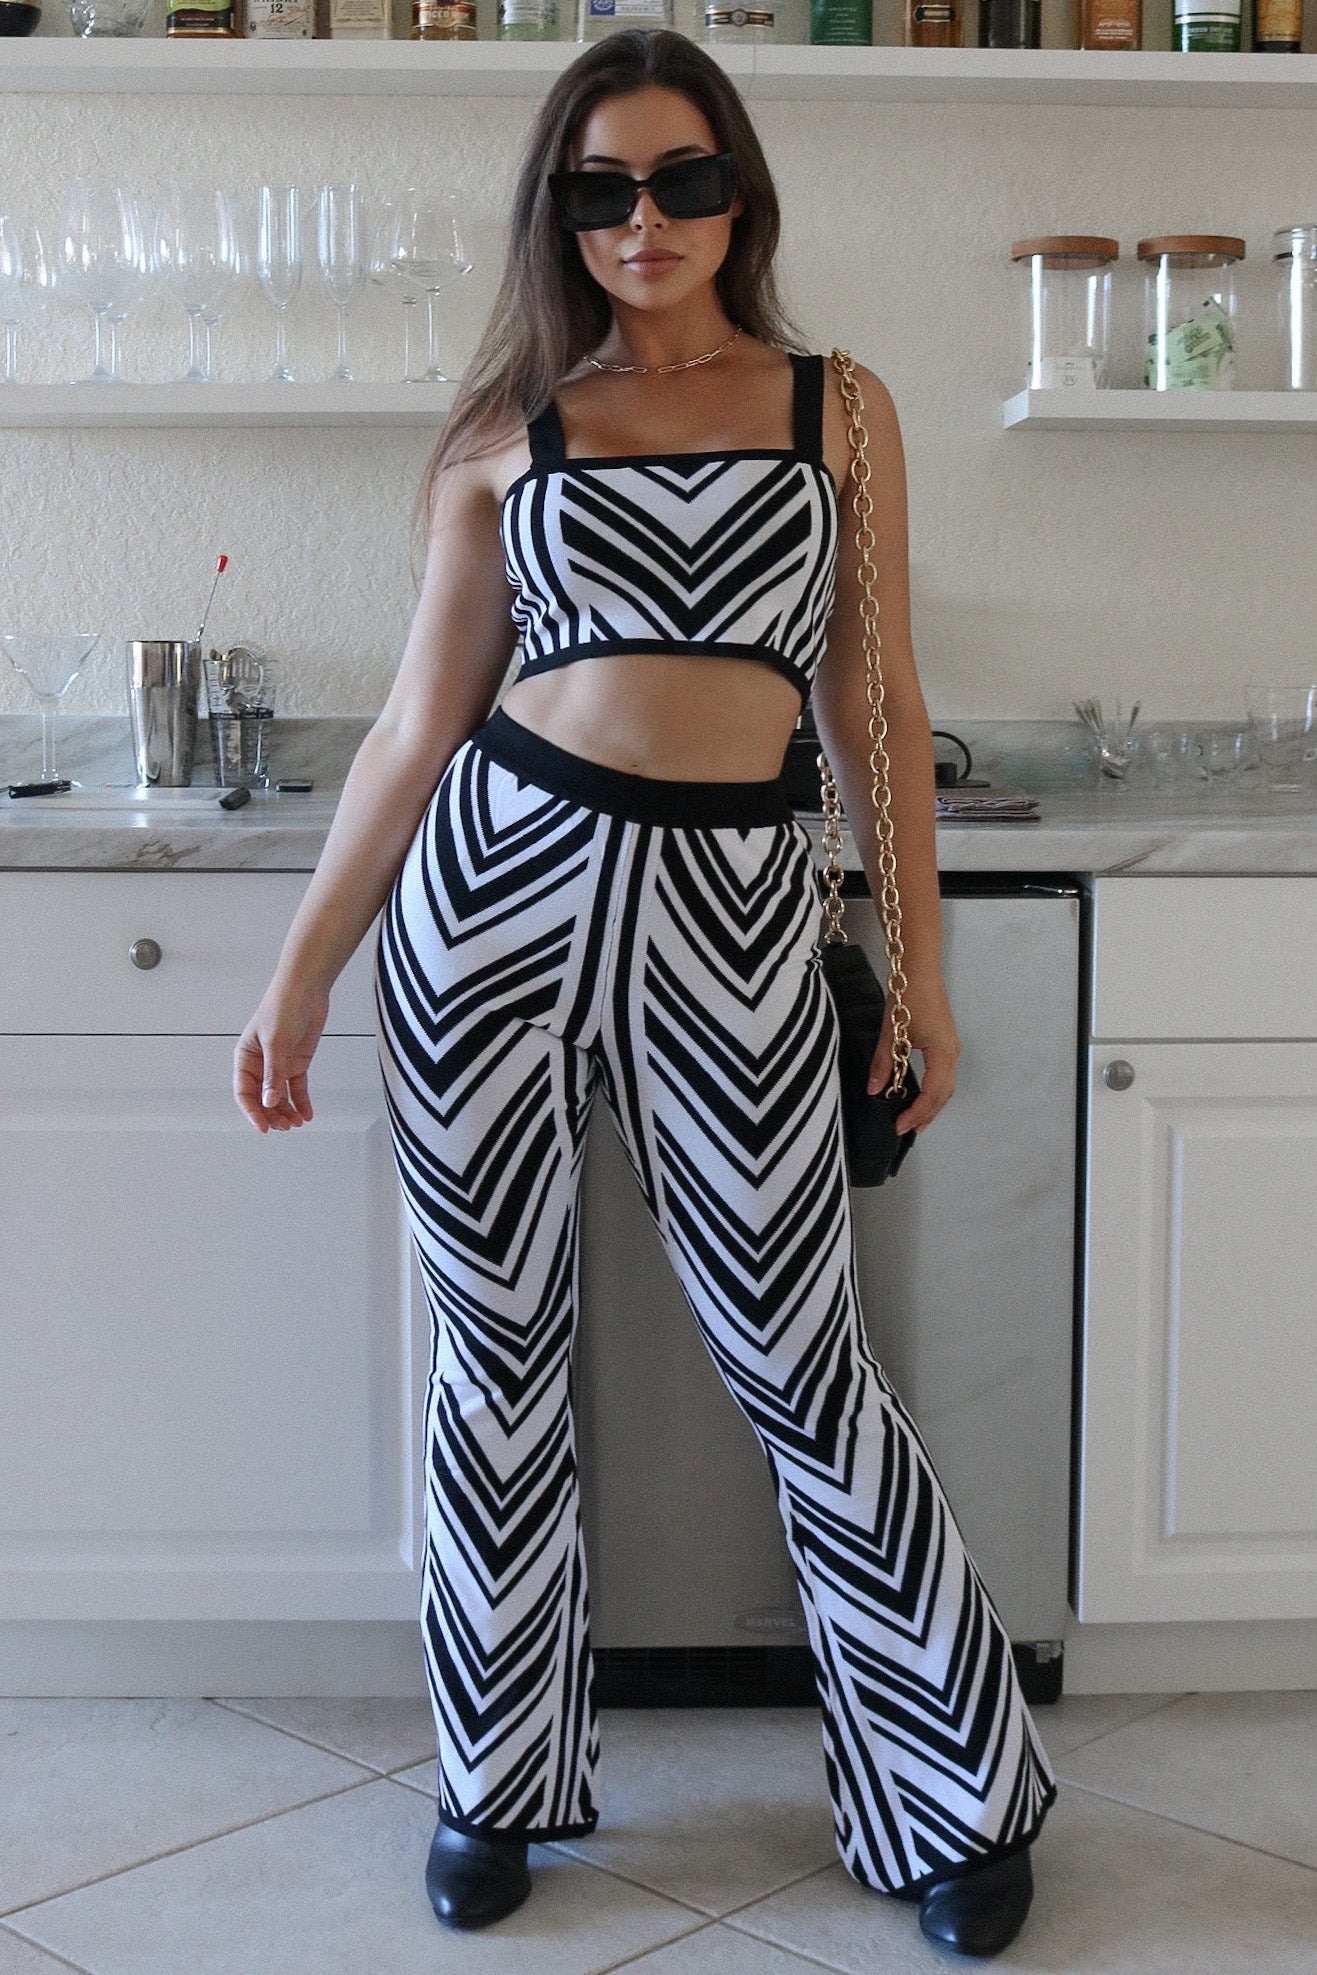 Woven Striped Boot Cut Pant Set with Matching Tube Tank Top in Black and White. Scarlette The Label, an online fashion boutique for women.